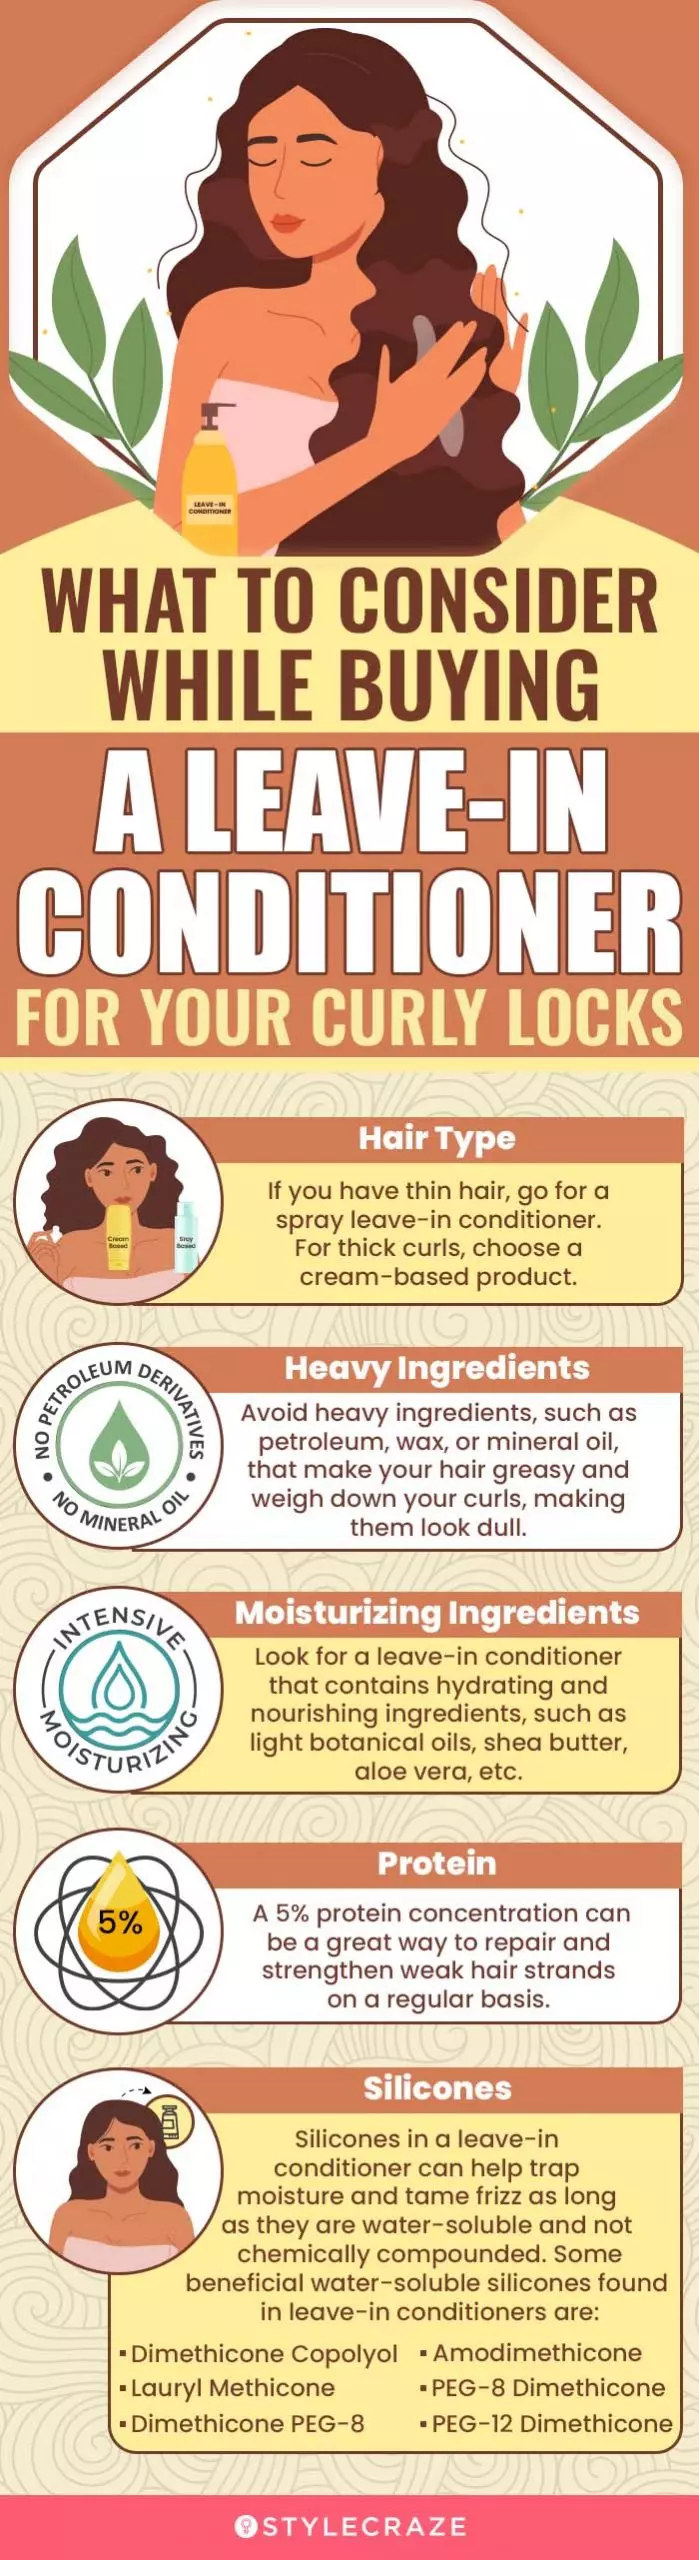 Leave-In Conditioner For Your Curly Locks: Buying Guide (infographic)